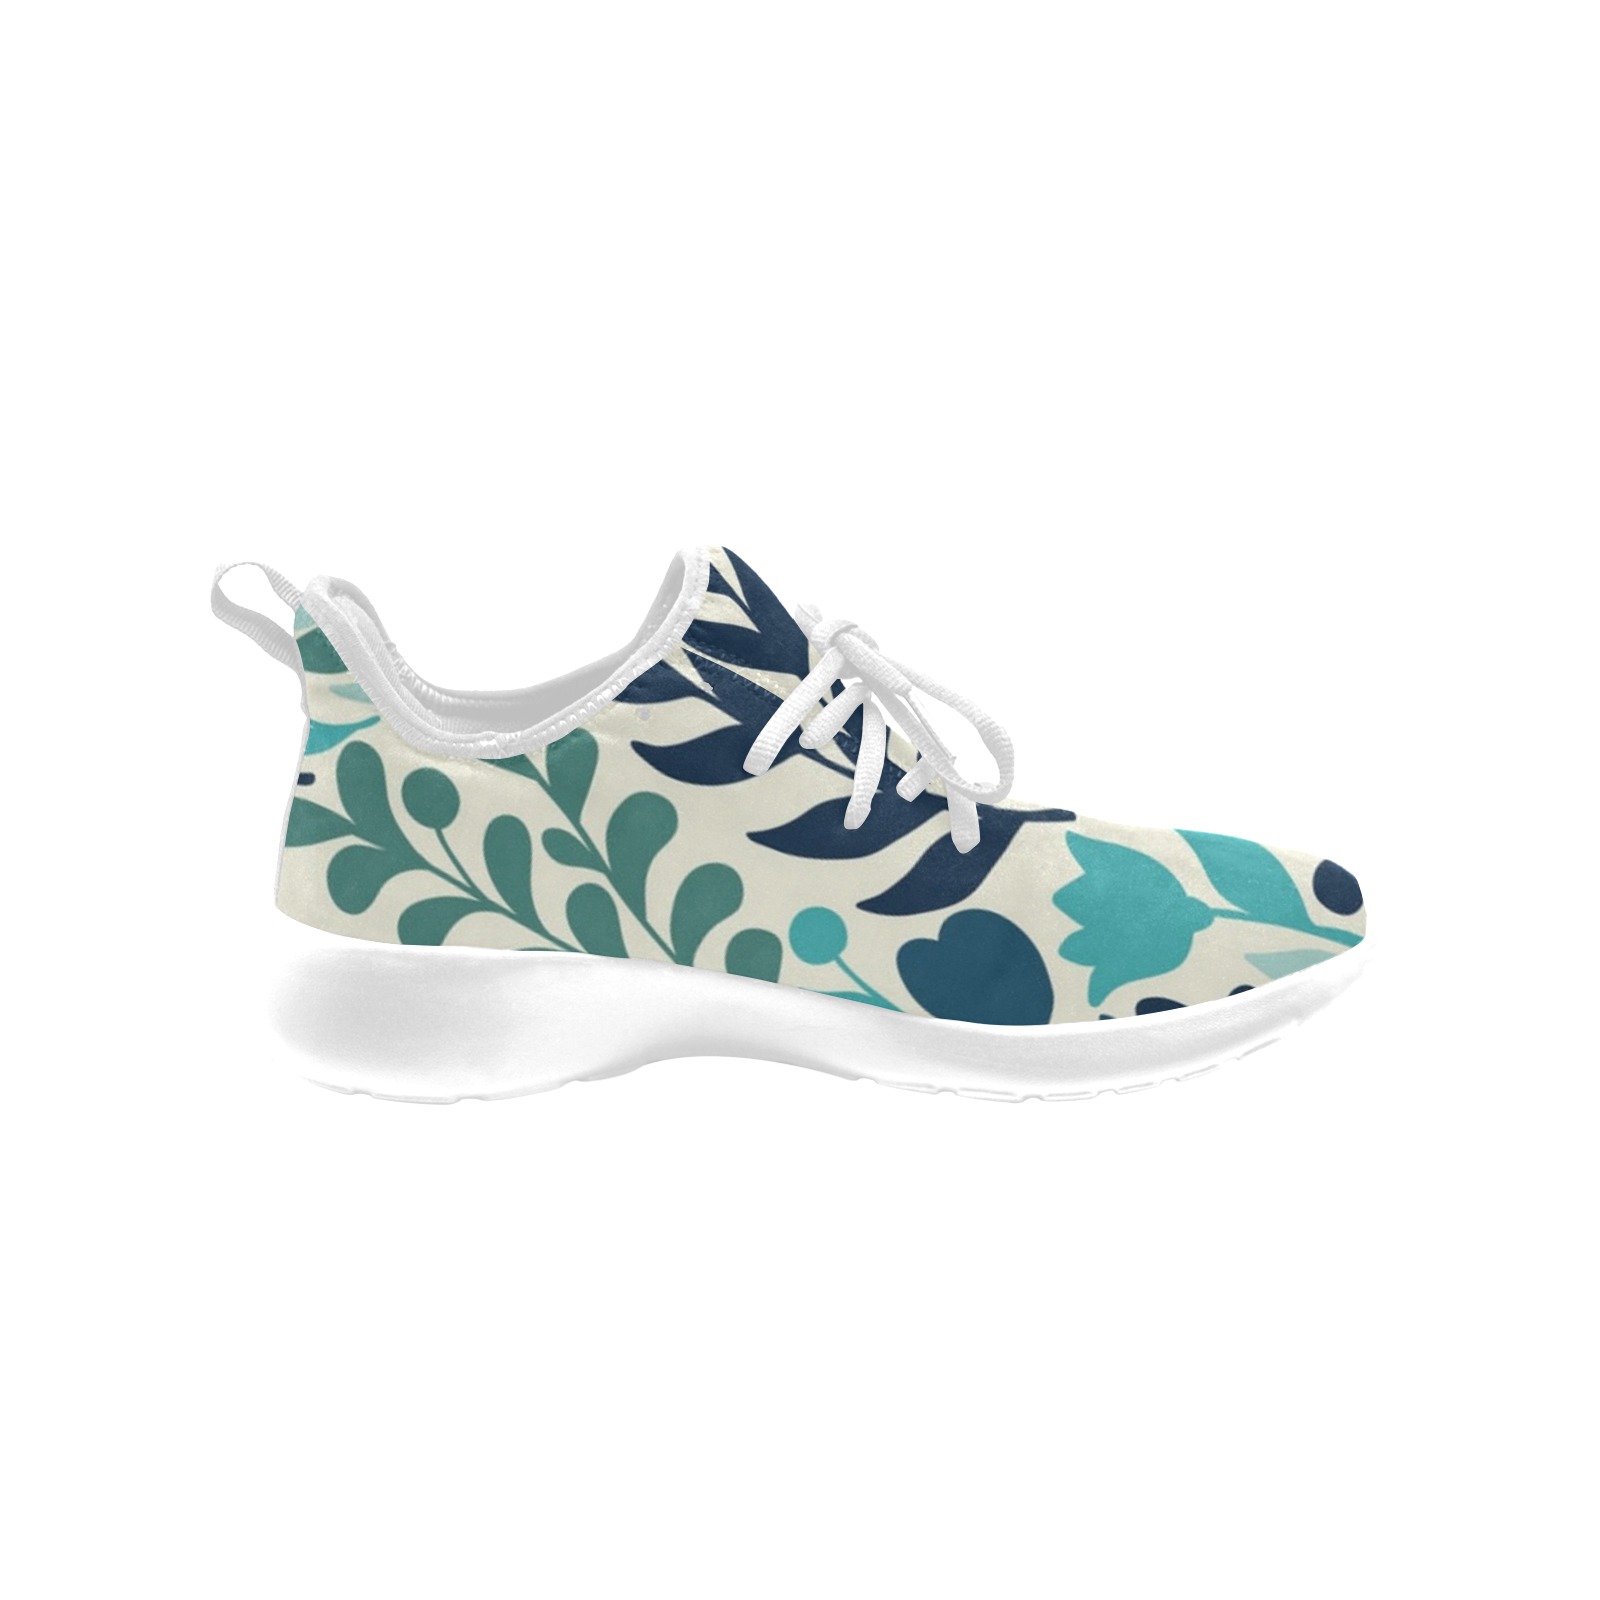 Doodle Floral with Leaves Women's One-Piece Vamp Sneakers (Model 67502)